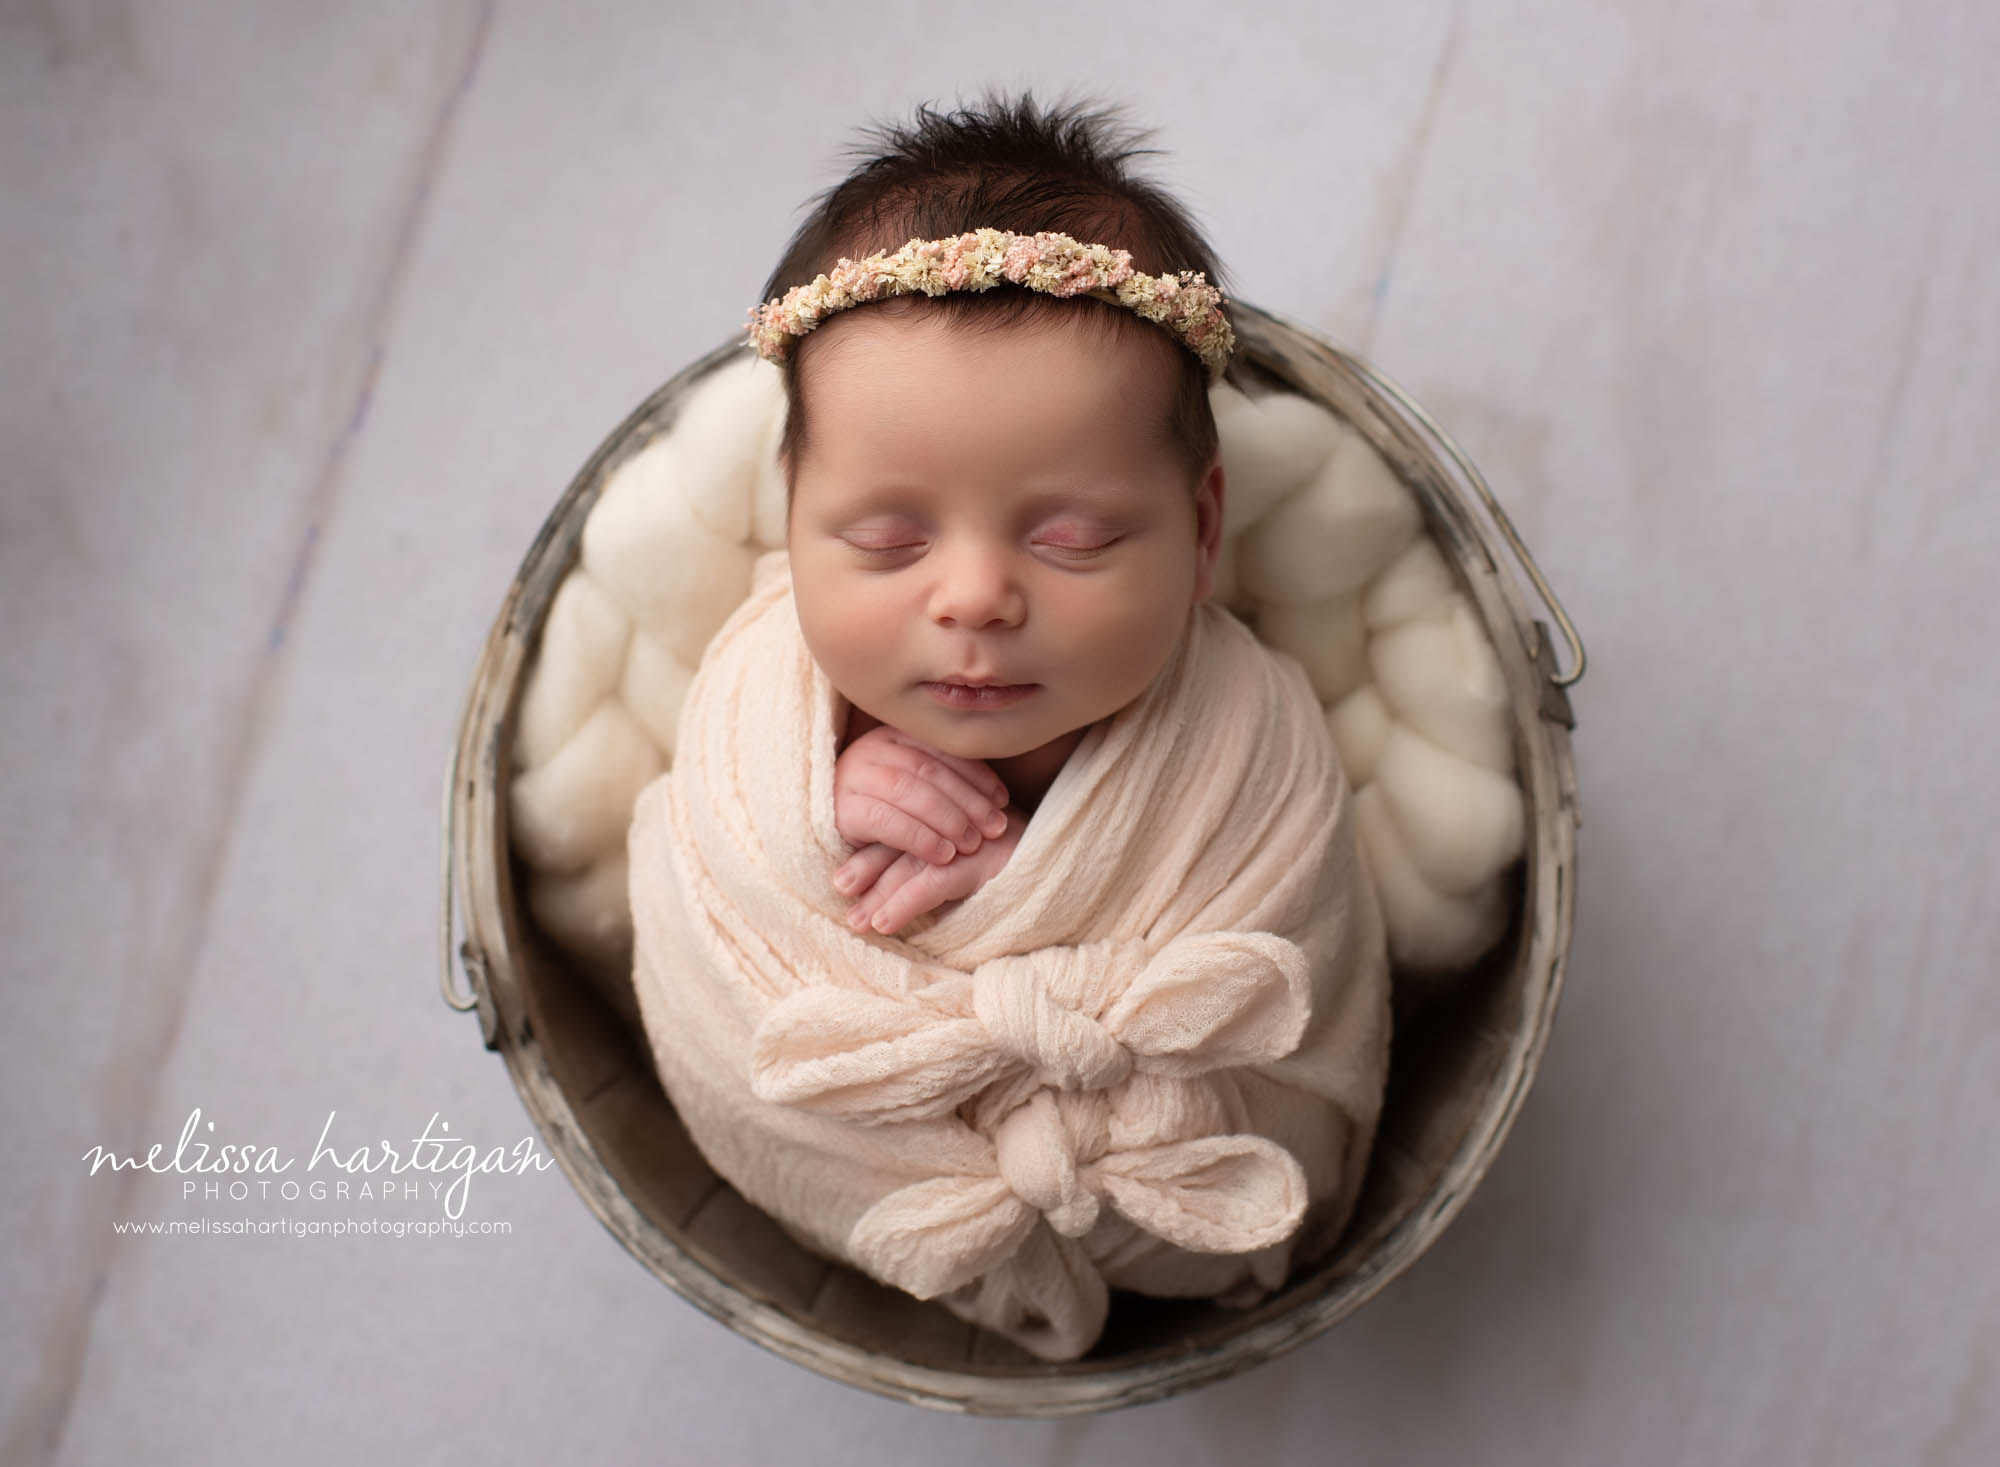 Newborn baby girl wrapped in pink wrap with bows and floral headband